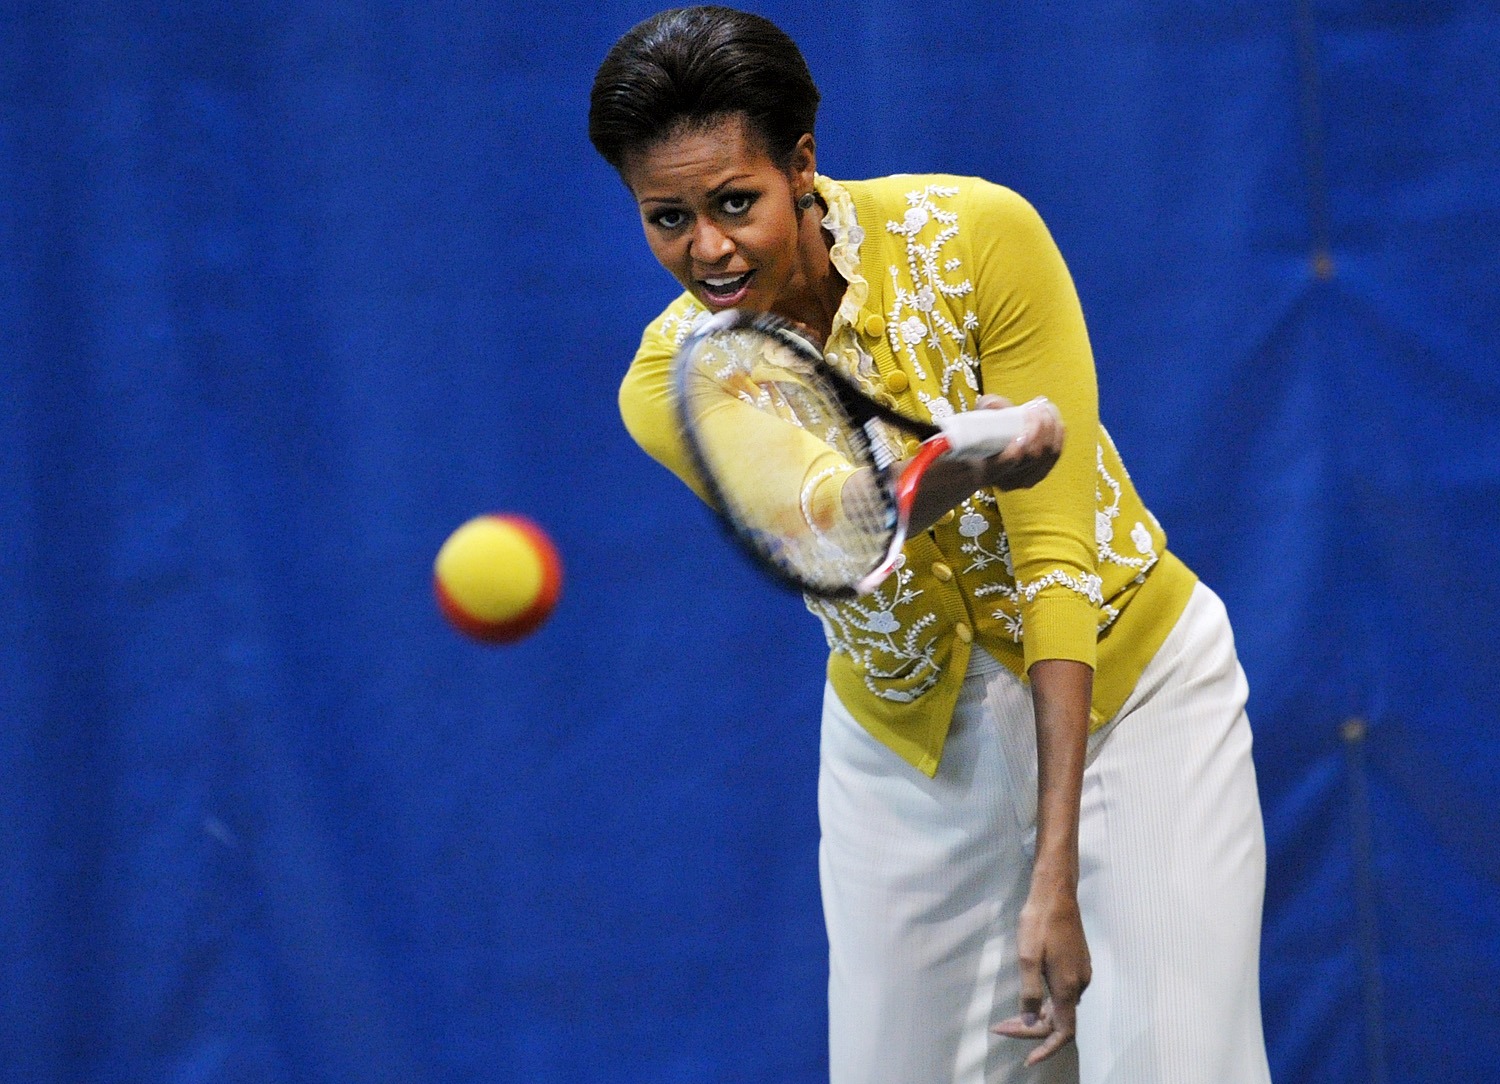 Tennis anyone? Michelle Obama swings the racket with D.C